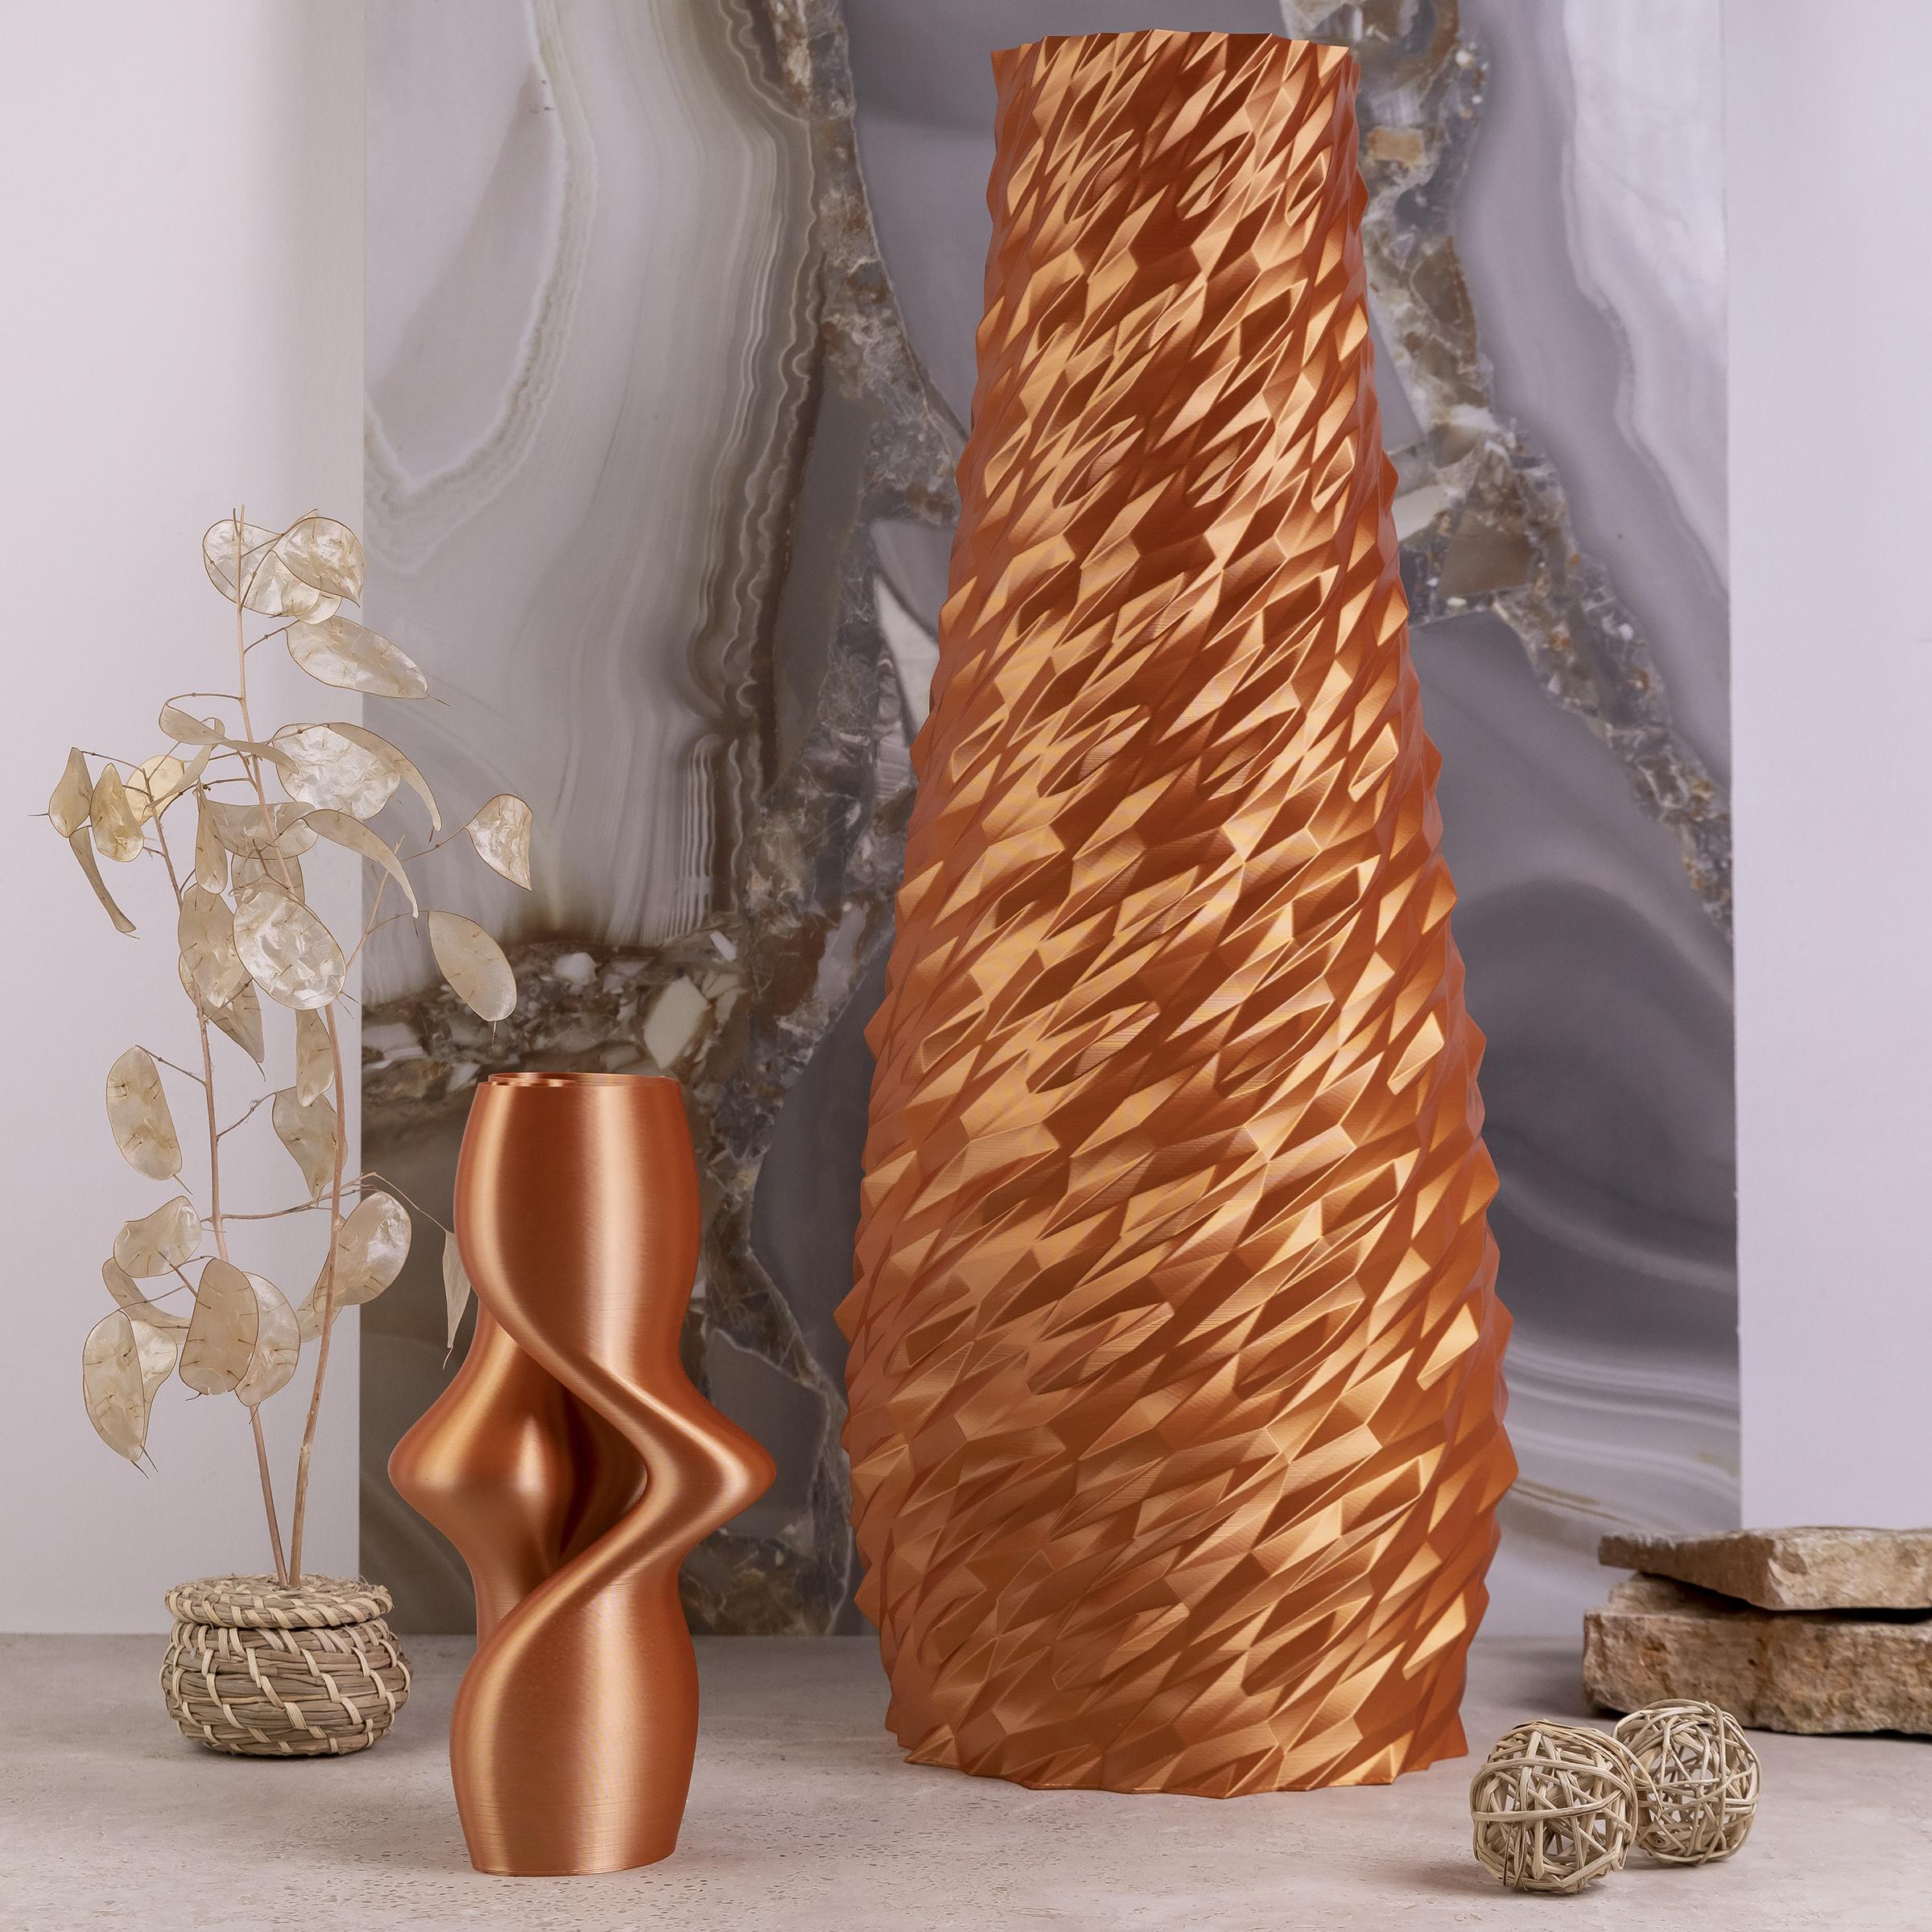 Dragonskin, Copper Contemporary Sustainable Vase-Sculpture For Sale 2